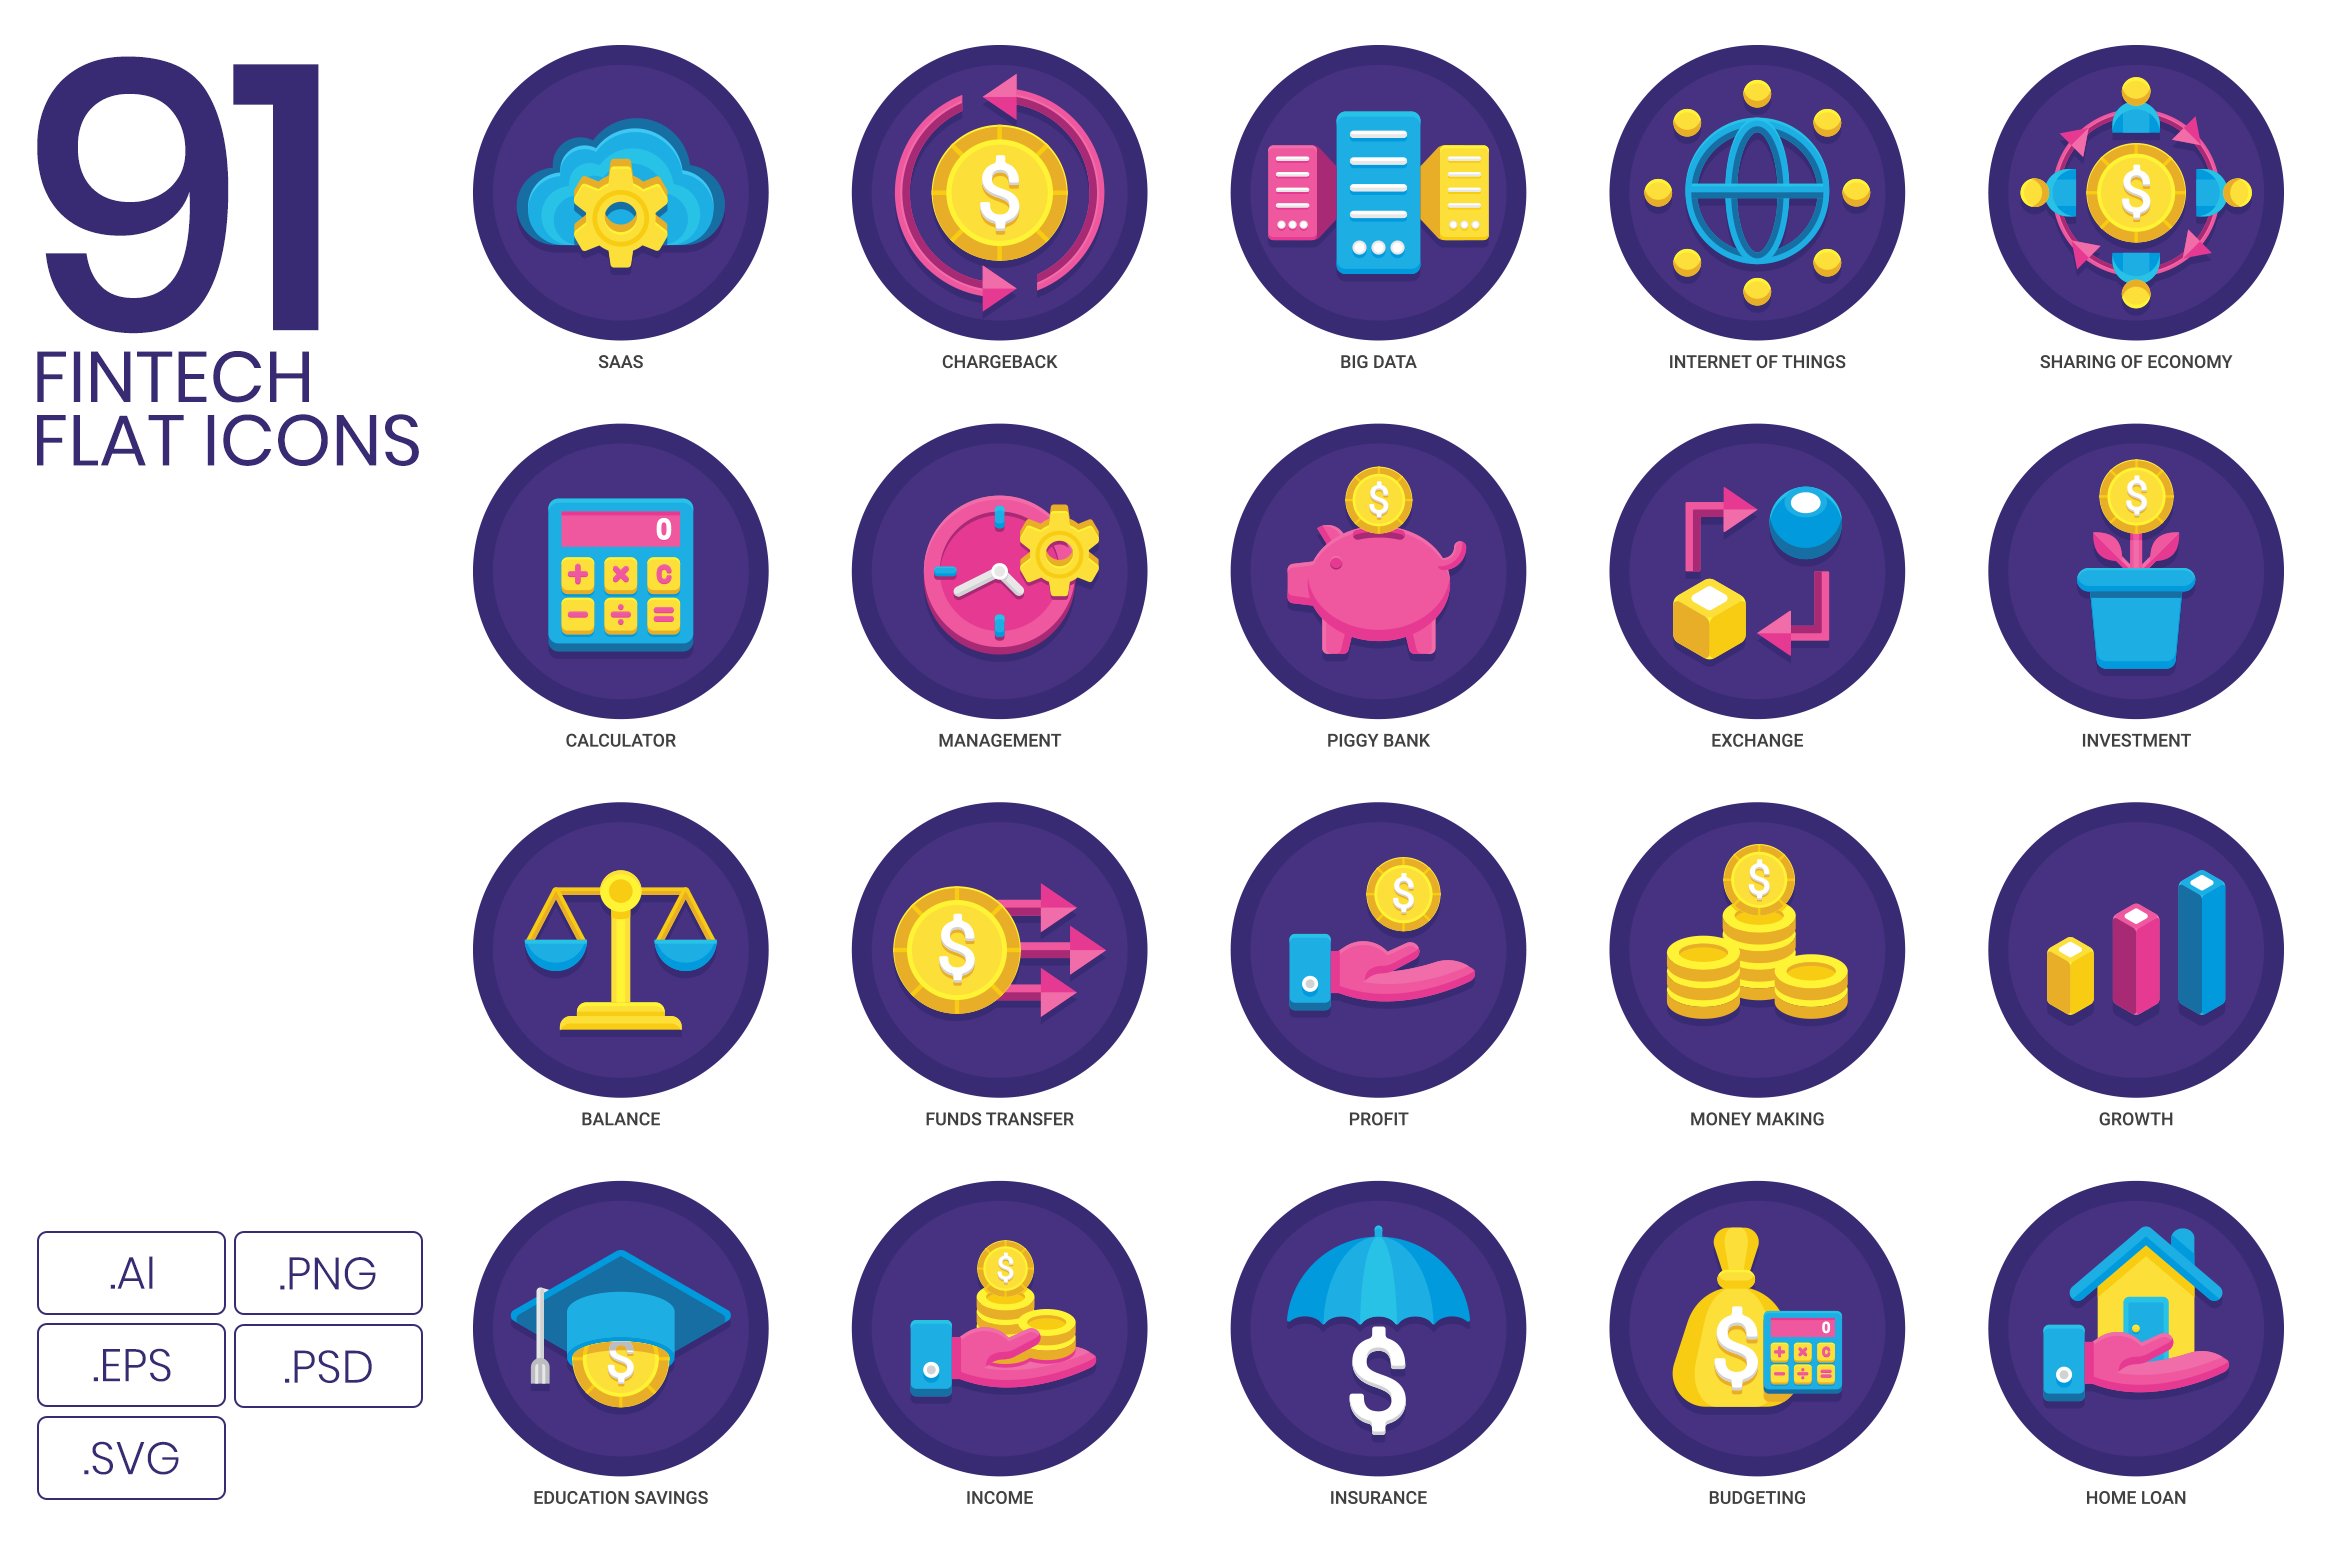 Fintech - Finance Technology Icons cover image.